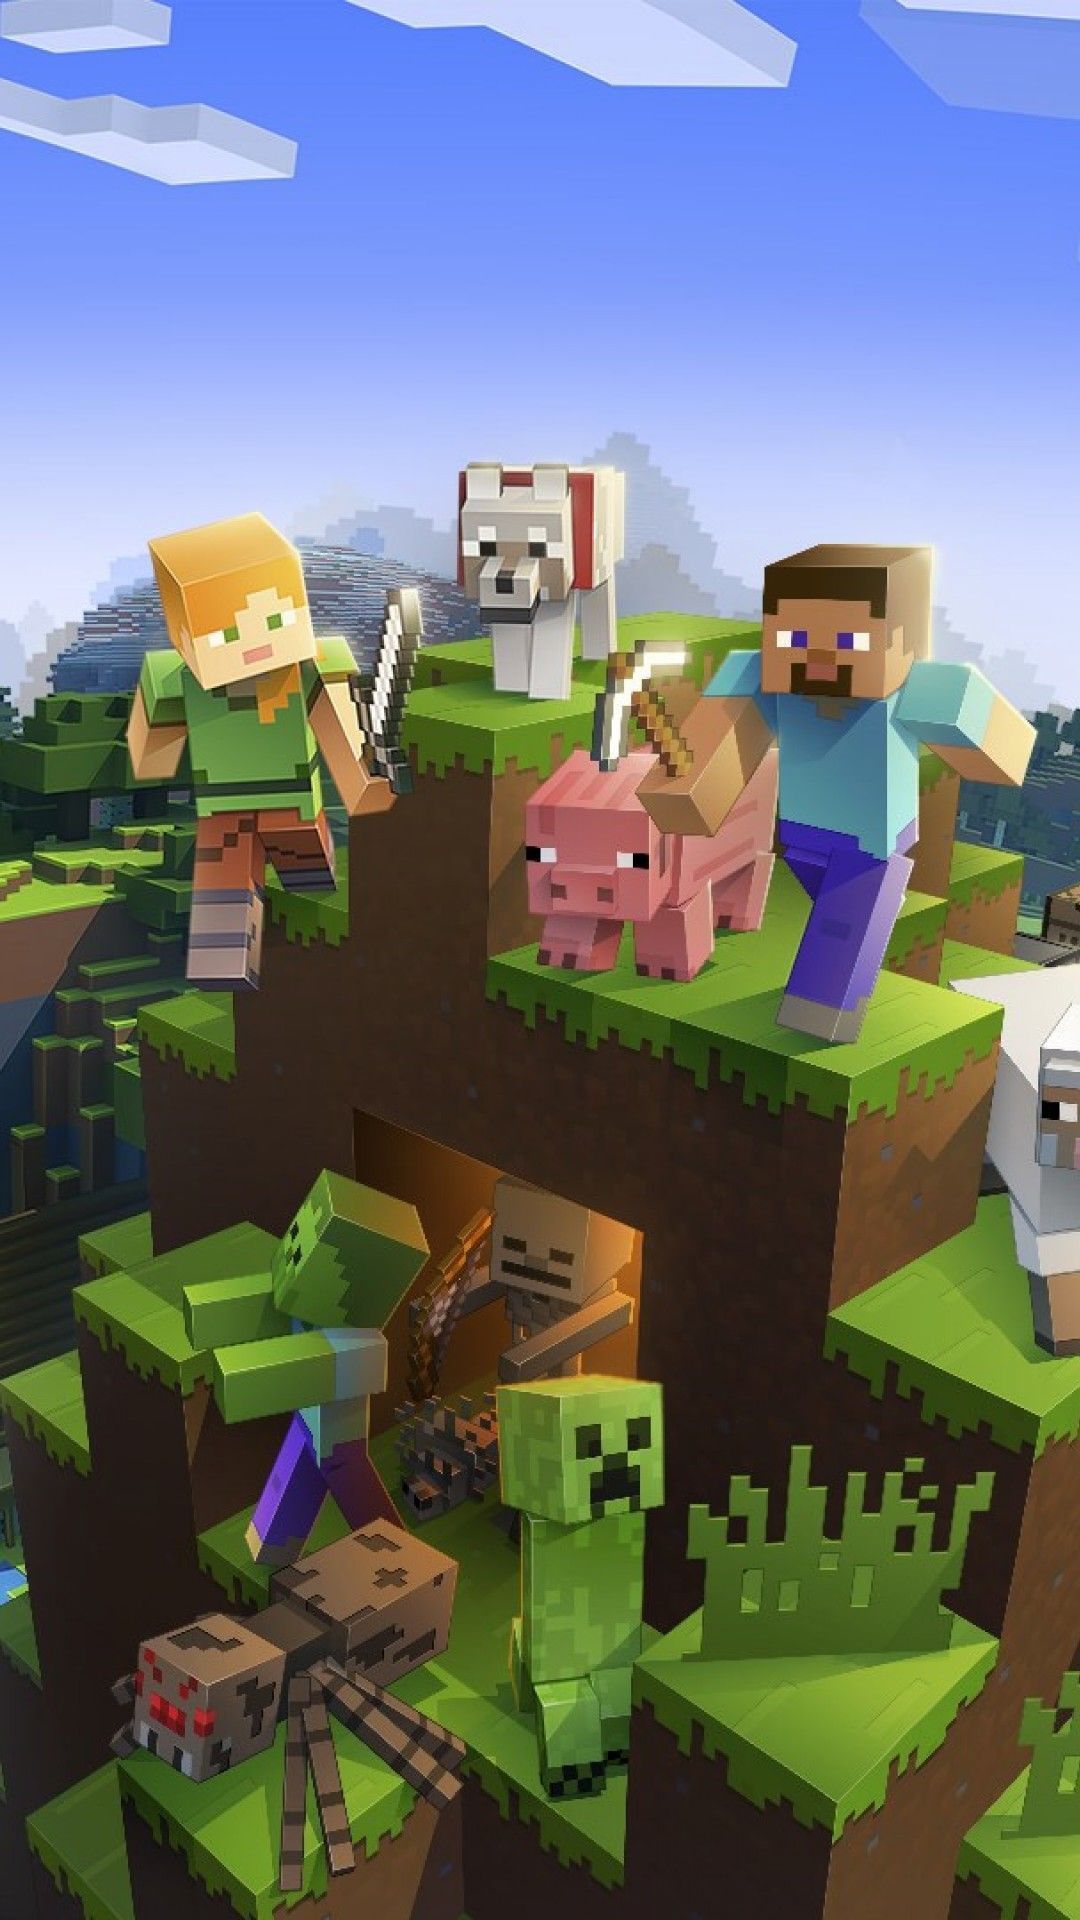 Minecraft game with many different characters - Minecraft